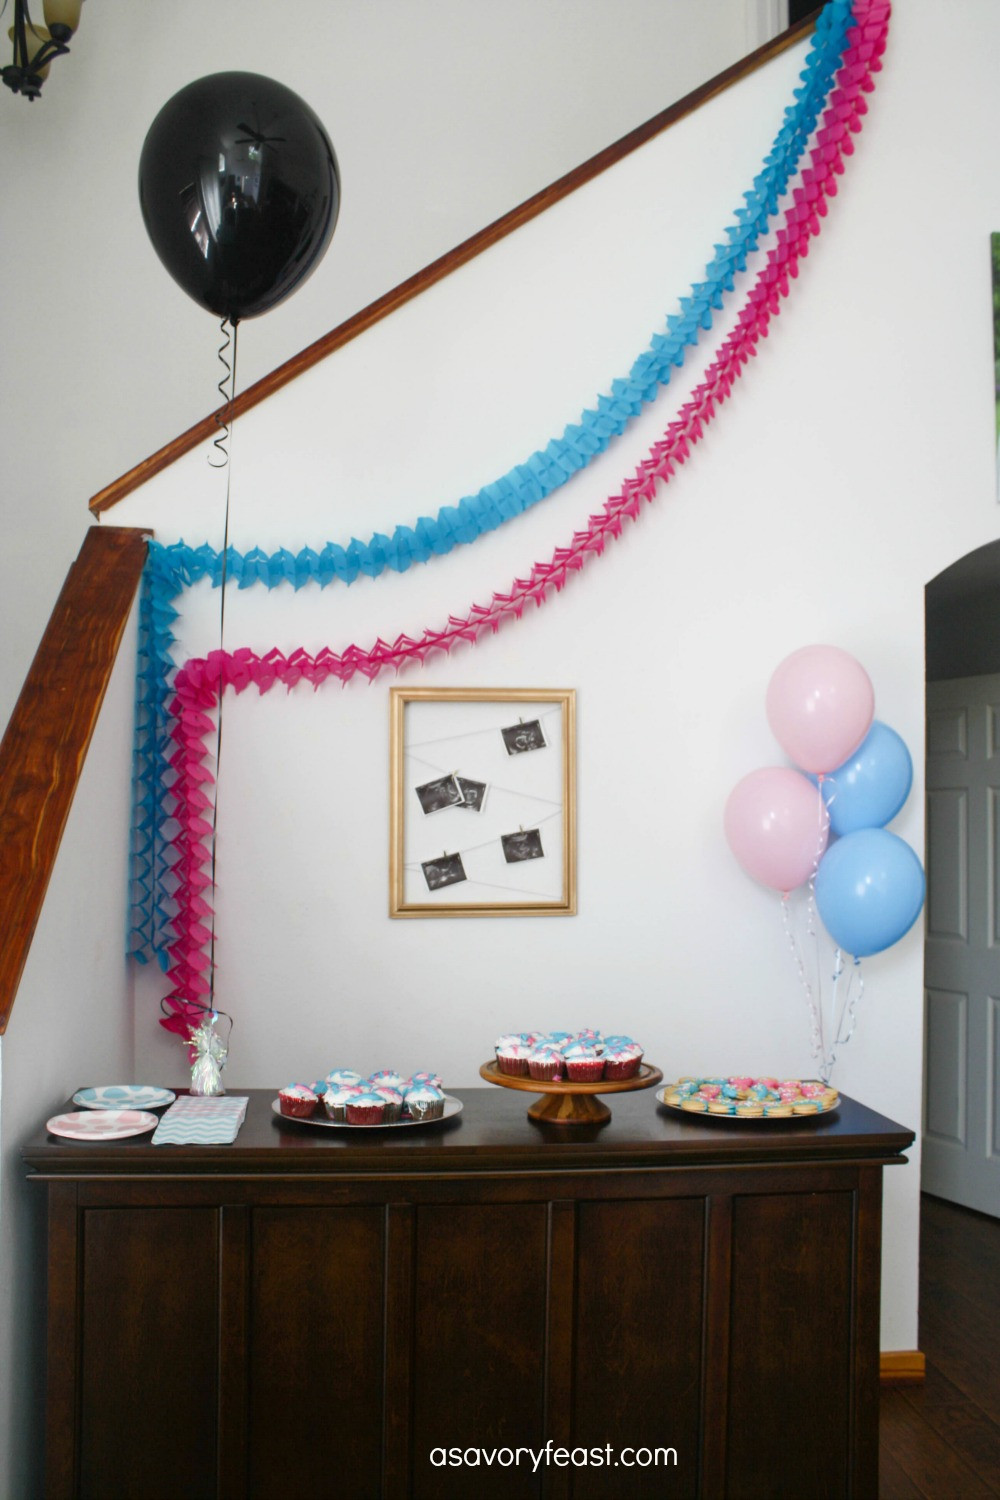 Simple Gender Reveal Party Ideas
 Gender Reveal Party Inspiration